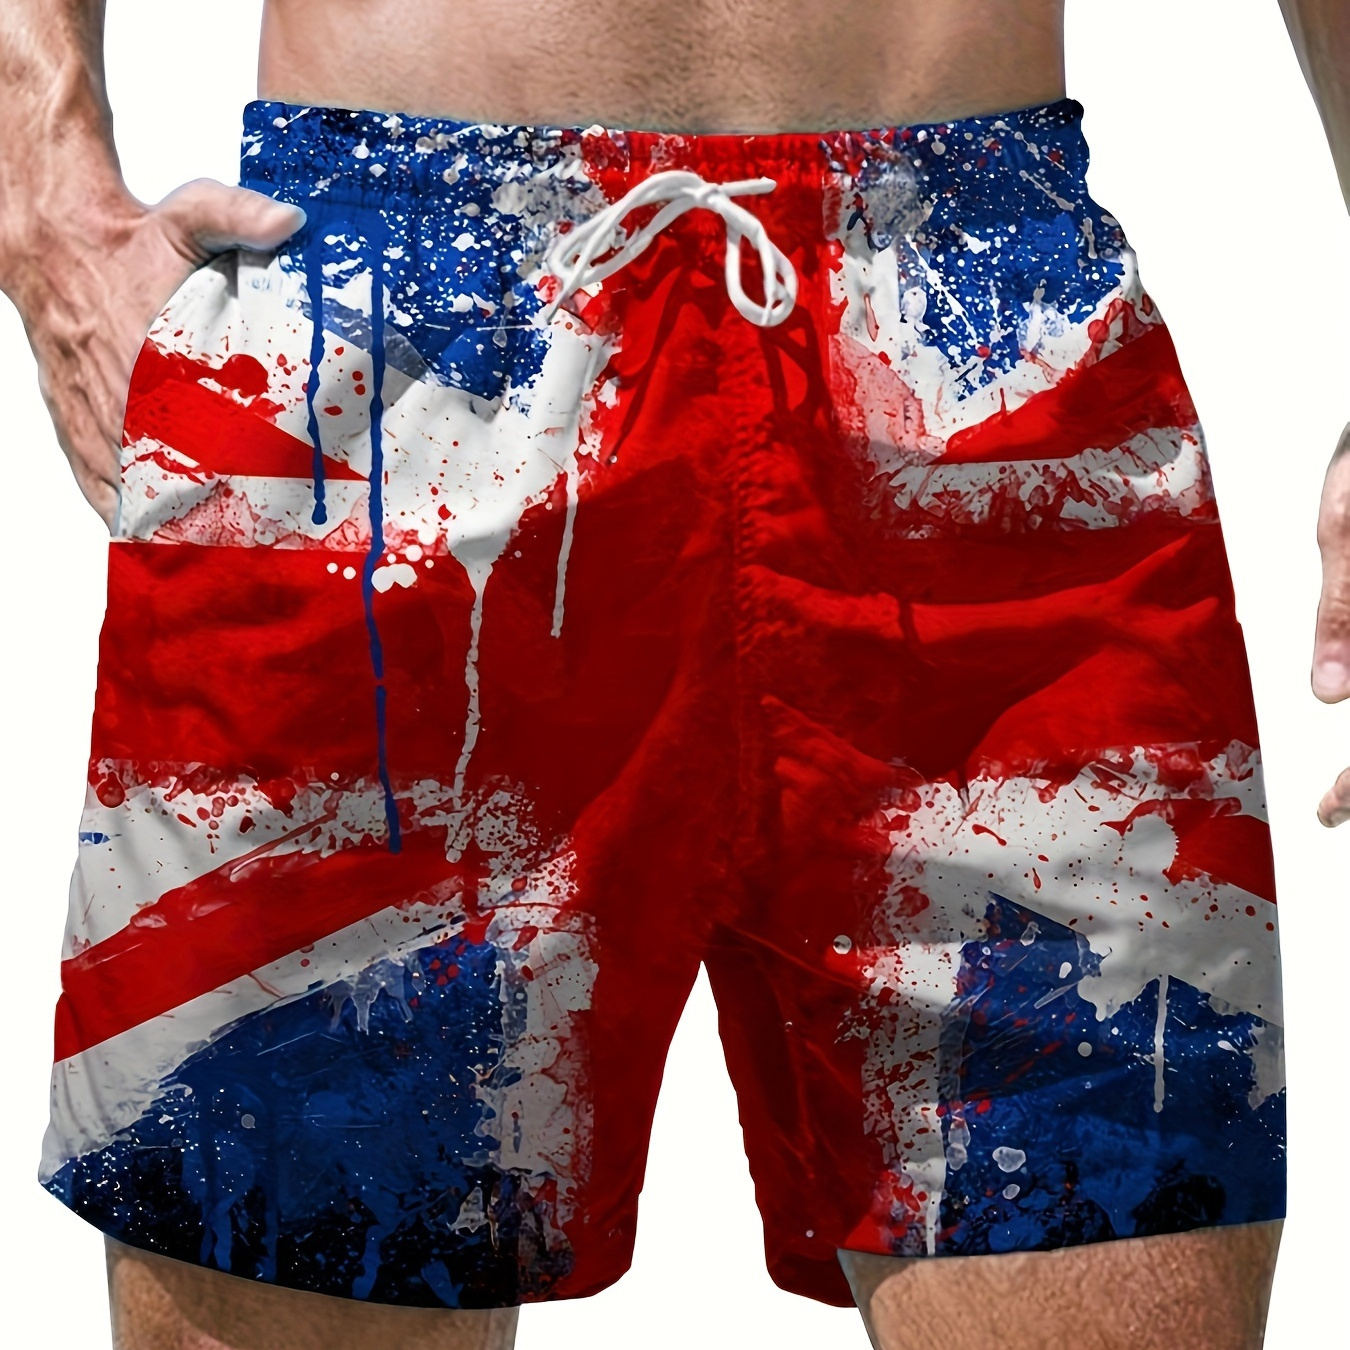 

England Flag Pattern Print, Men's Comfy Shorts With Drawstring And Pockets Casual Loose Shorts, Men's Summer Clothing, As Gifts For Men Daily Leisure Loungewear Outdoors